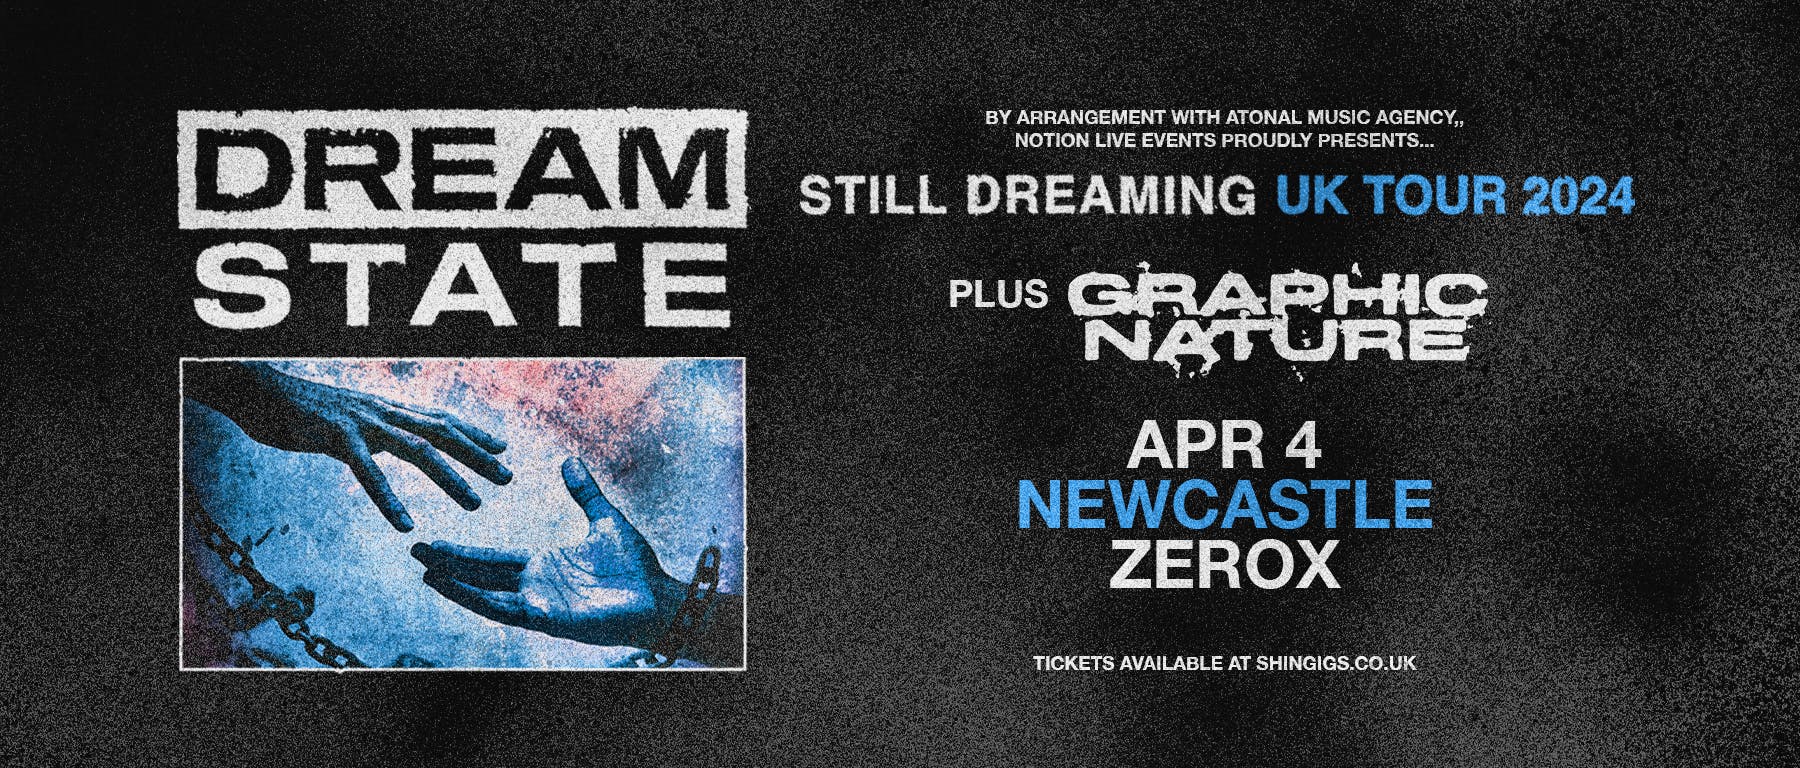 SOLD OUT!) Dream State + Graphic Nature